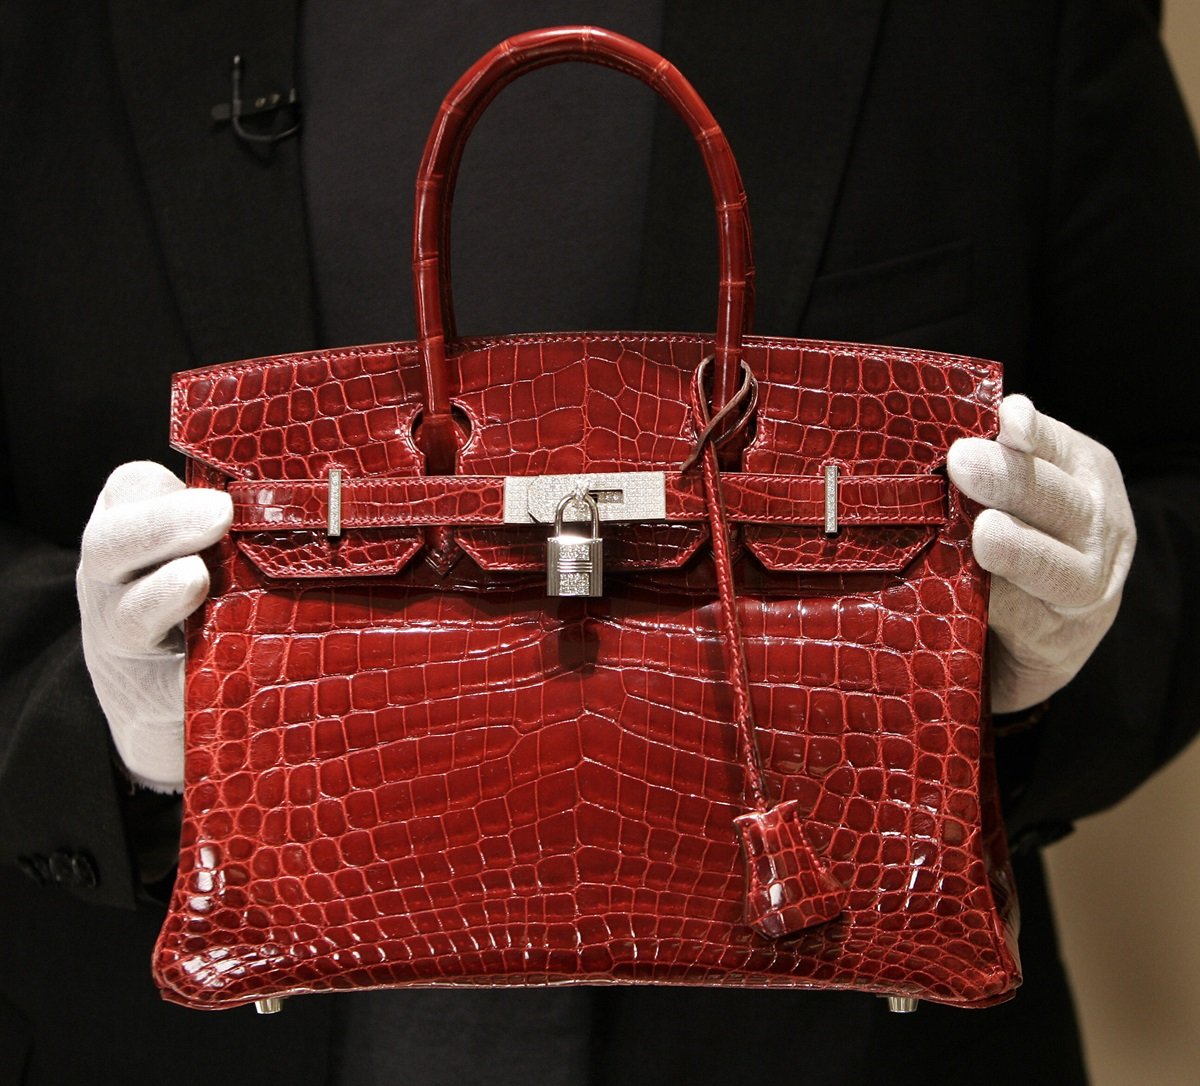 : A employee holds a 129,000 USD crocodile Hermes Birkin Bag for the press to see during a private opening for the new Hermes store